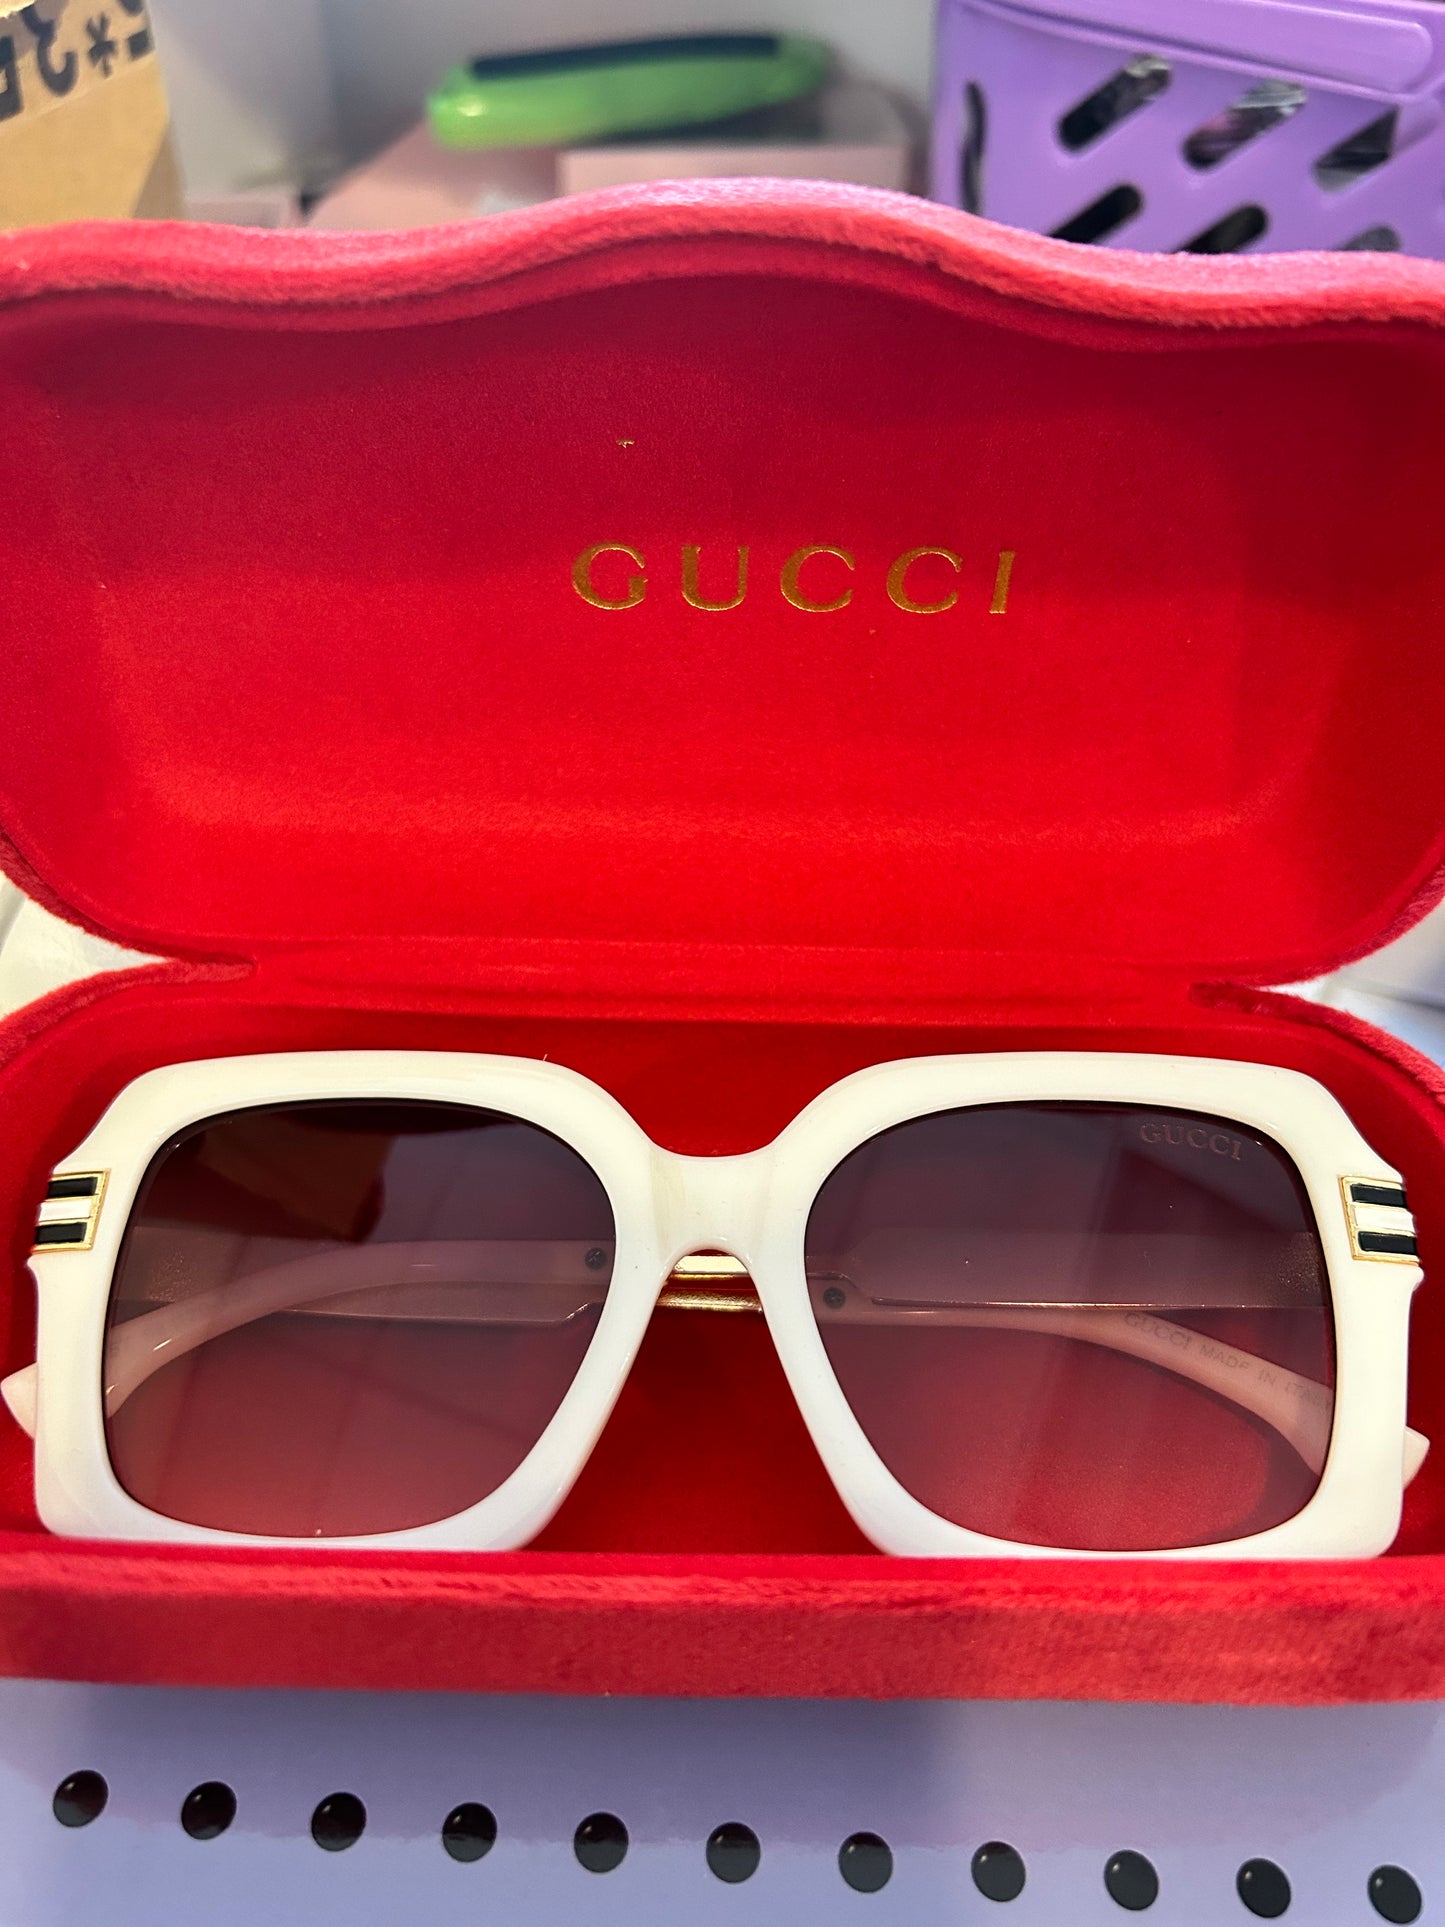 Gucci inspired glasses